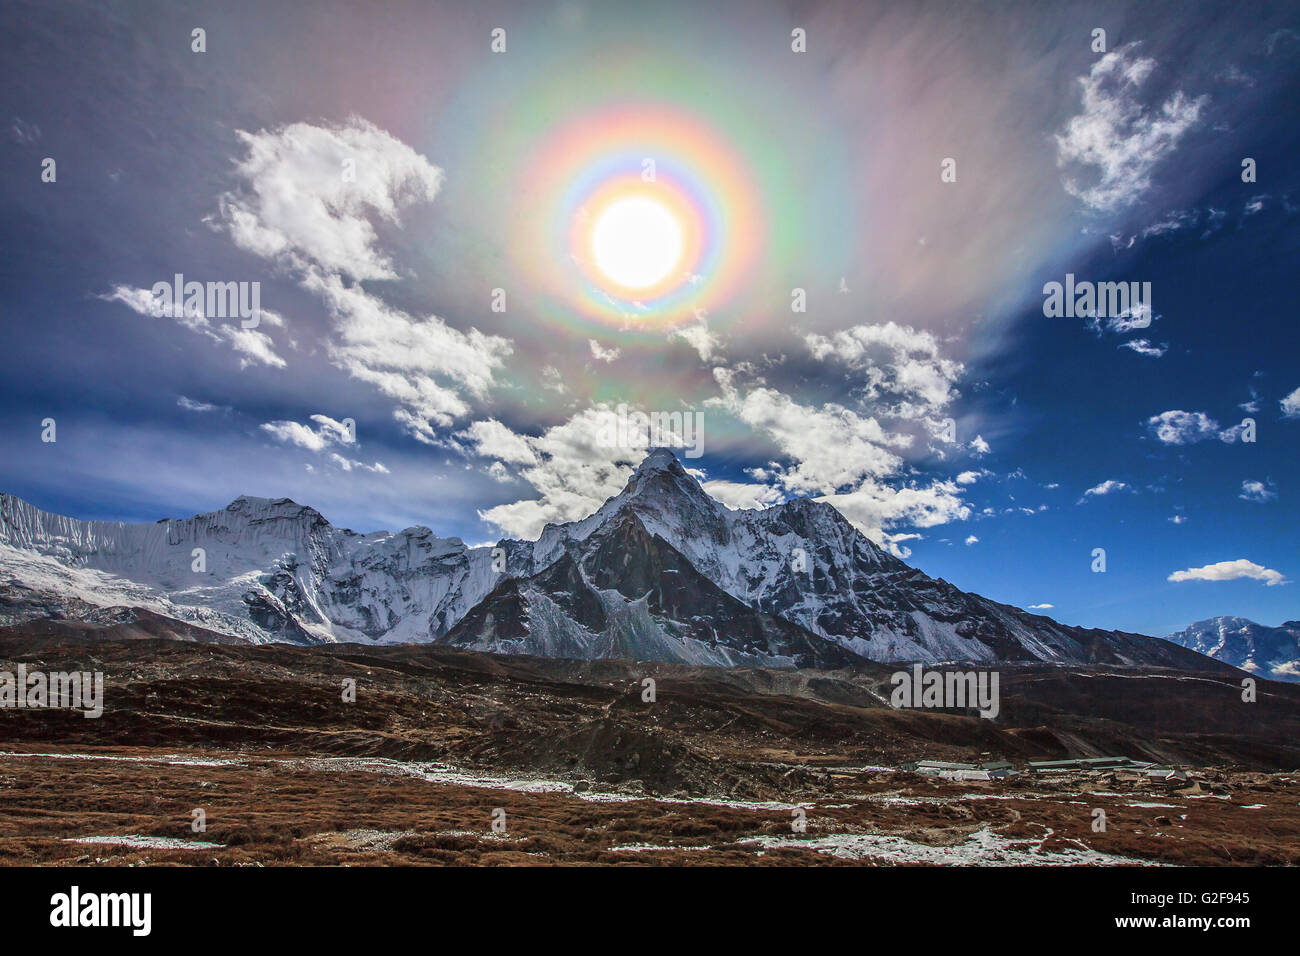 Colorful solar corona over the Himalayas. In the foreground is the famous Himalayan mountain peak Ama Dablam (Mother's Necklace) Stock Photo